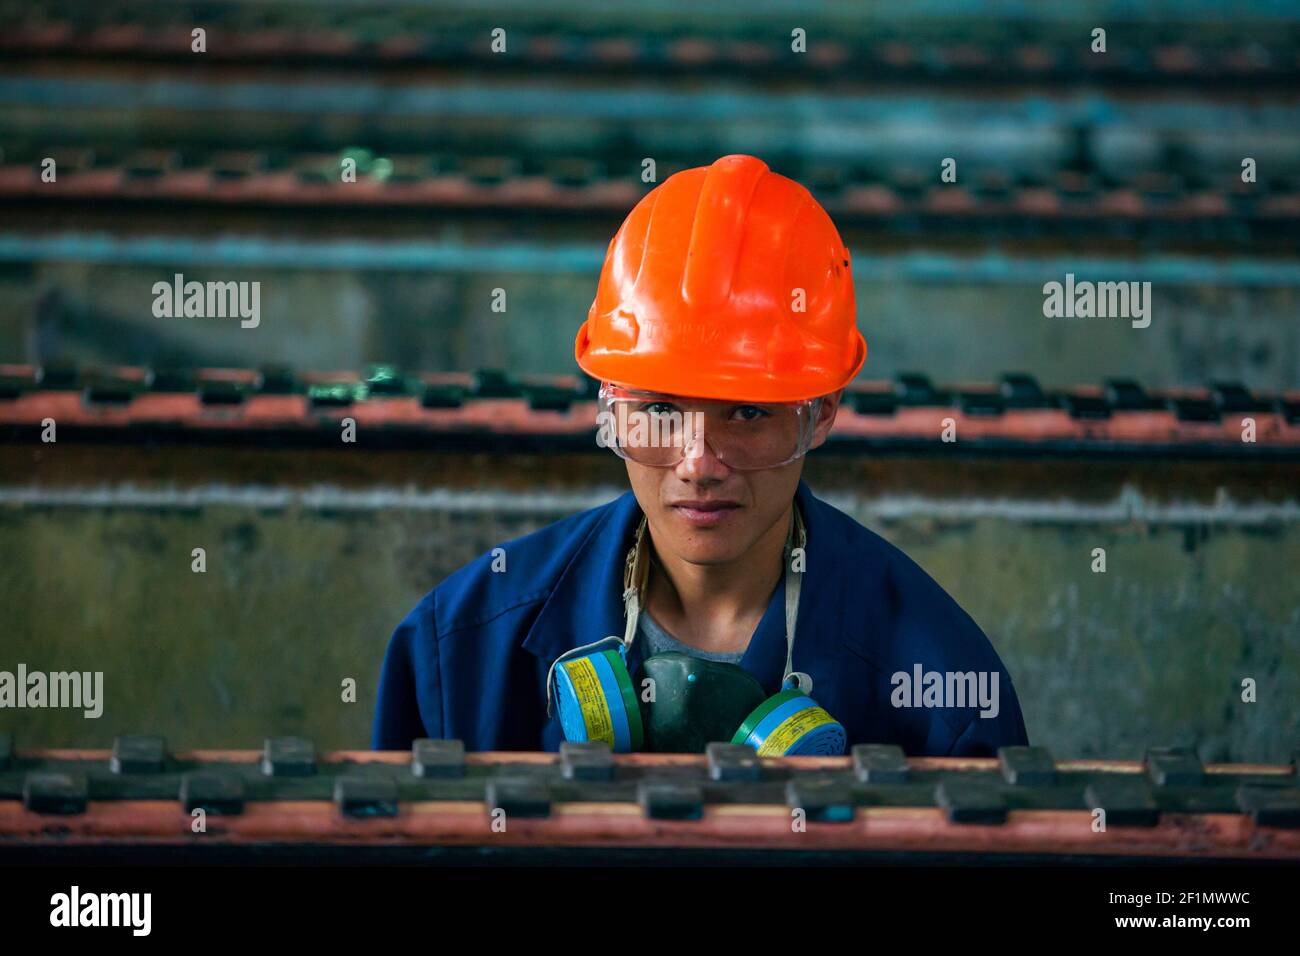 Copper metallurgical plant. Young Asian worker cleaning electrolysis bath. Stock Photo